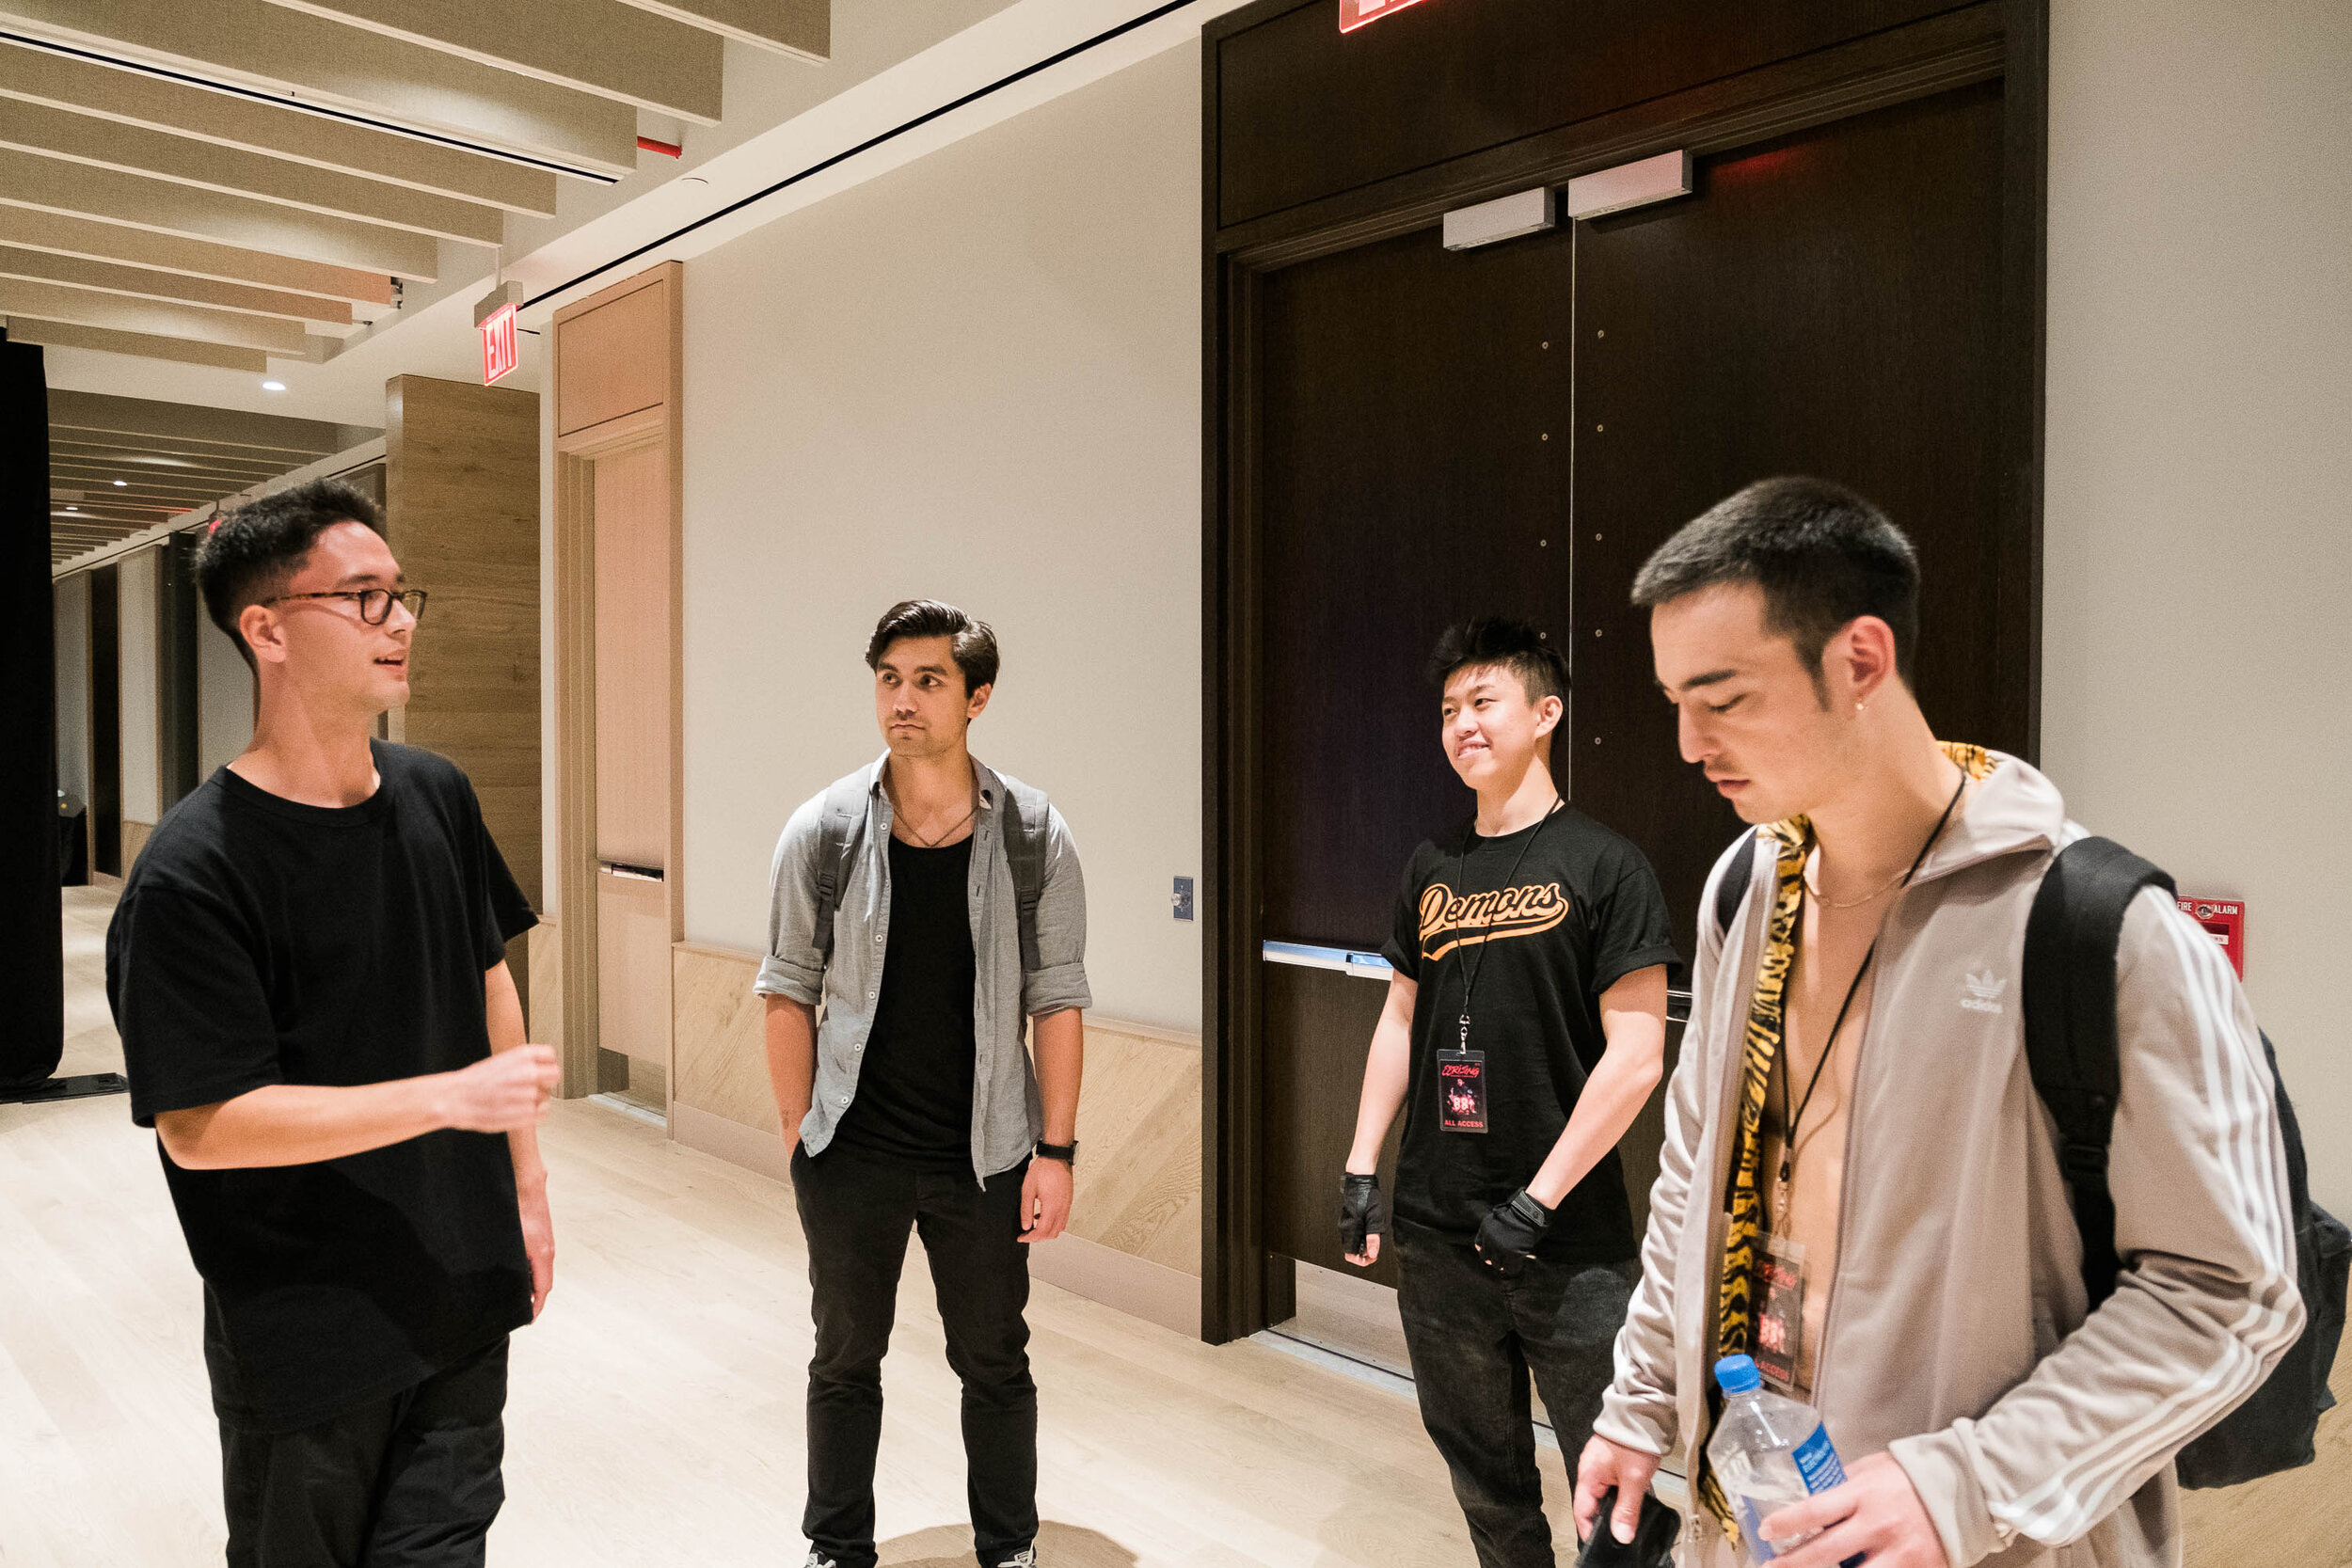  Backstage, 88rising’s biggest name artists, Joji, right, and Rich Brian, debate the merits of Brockhampton, another of-the-moment hip-hop collective, with others in the company’s orbit. 